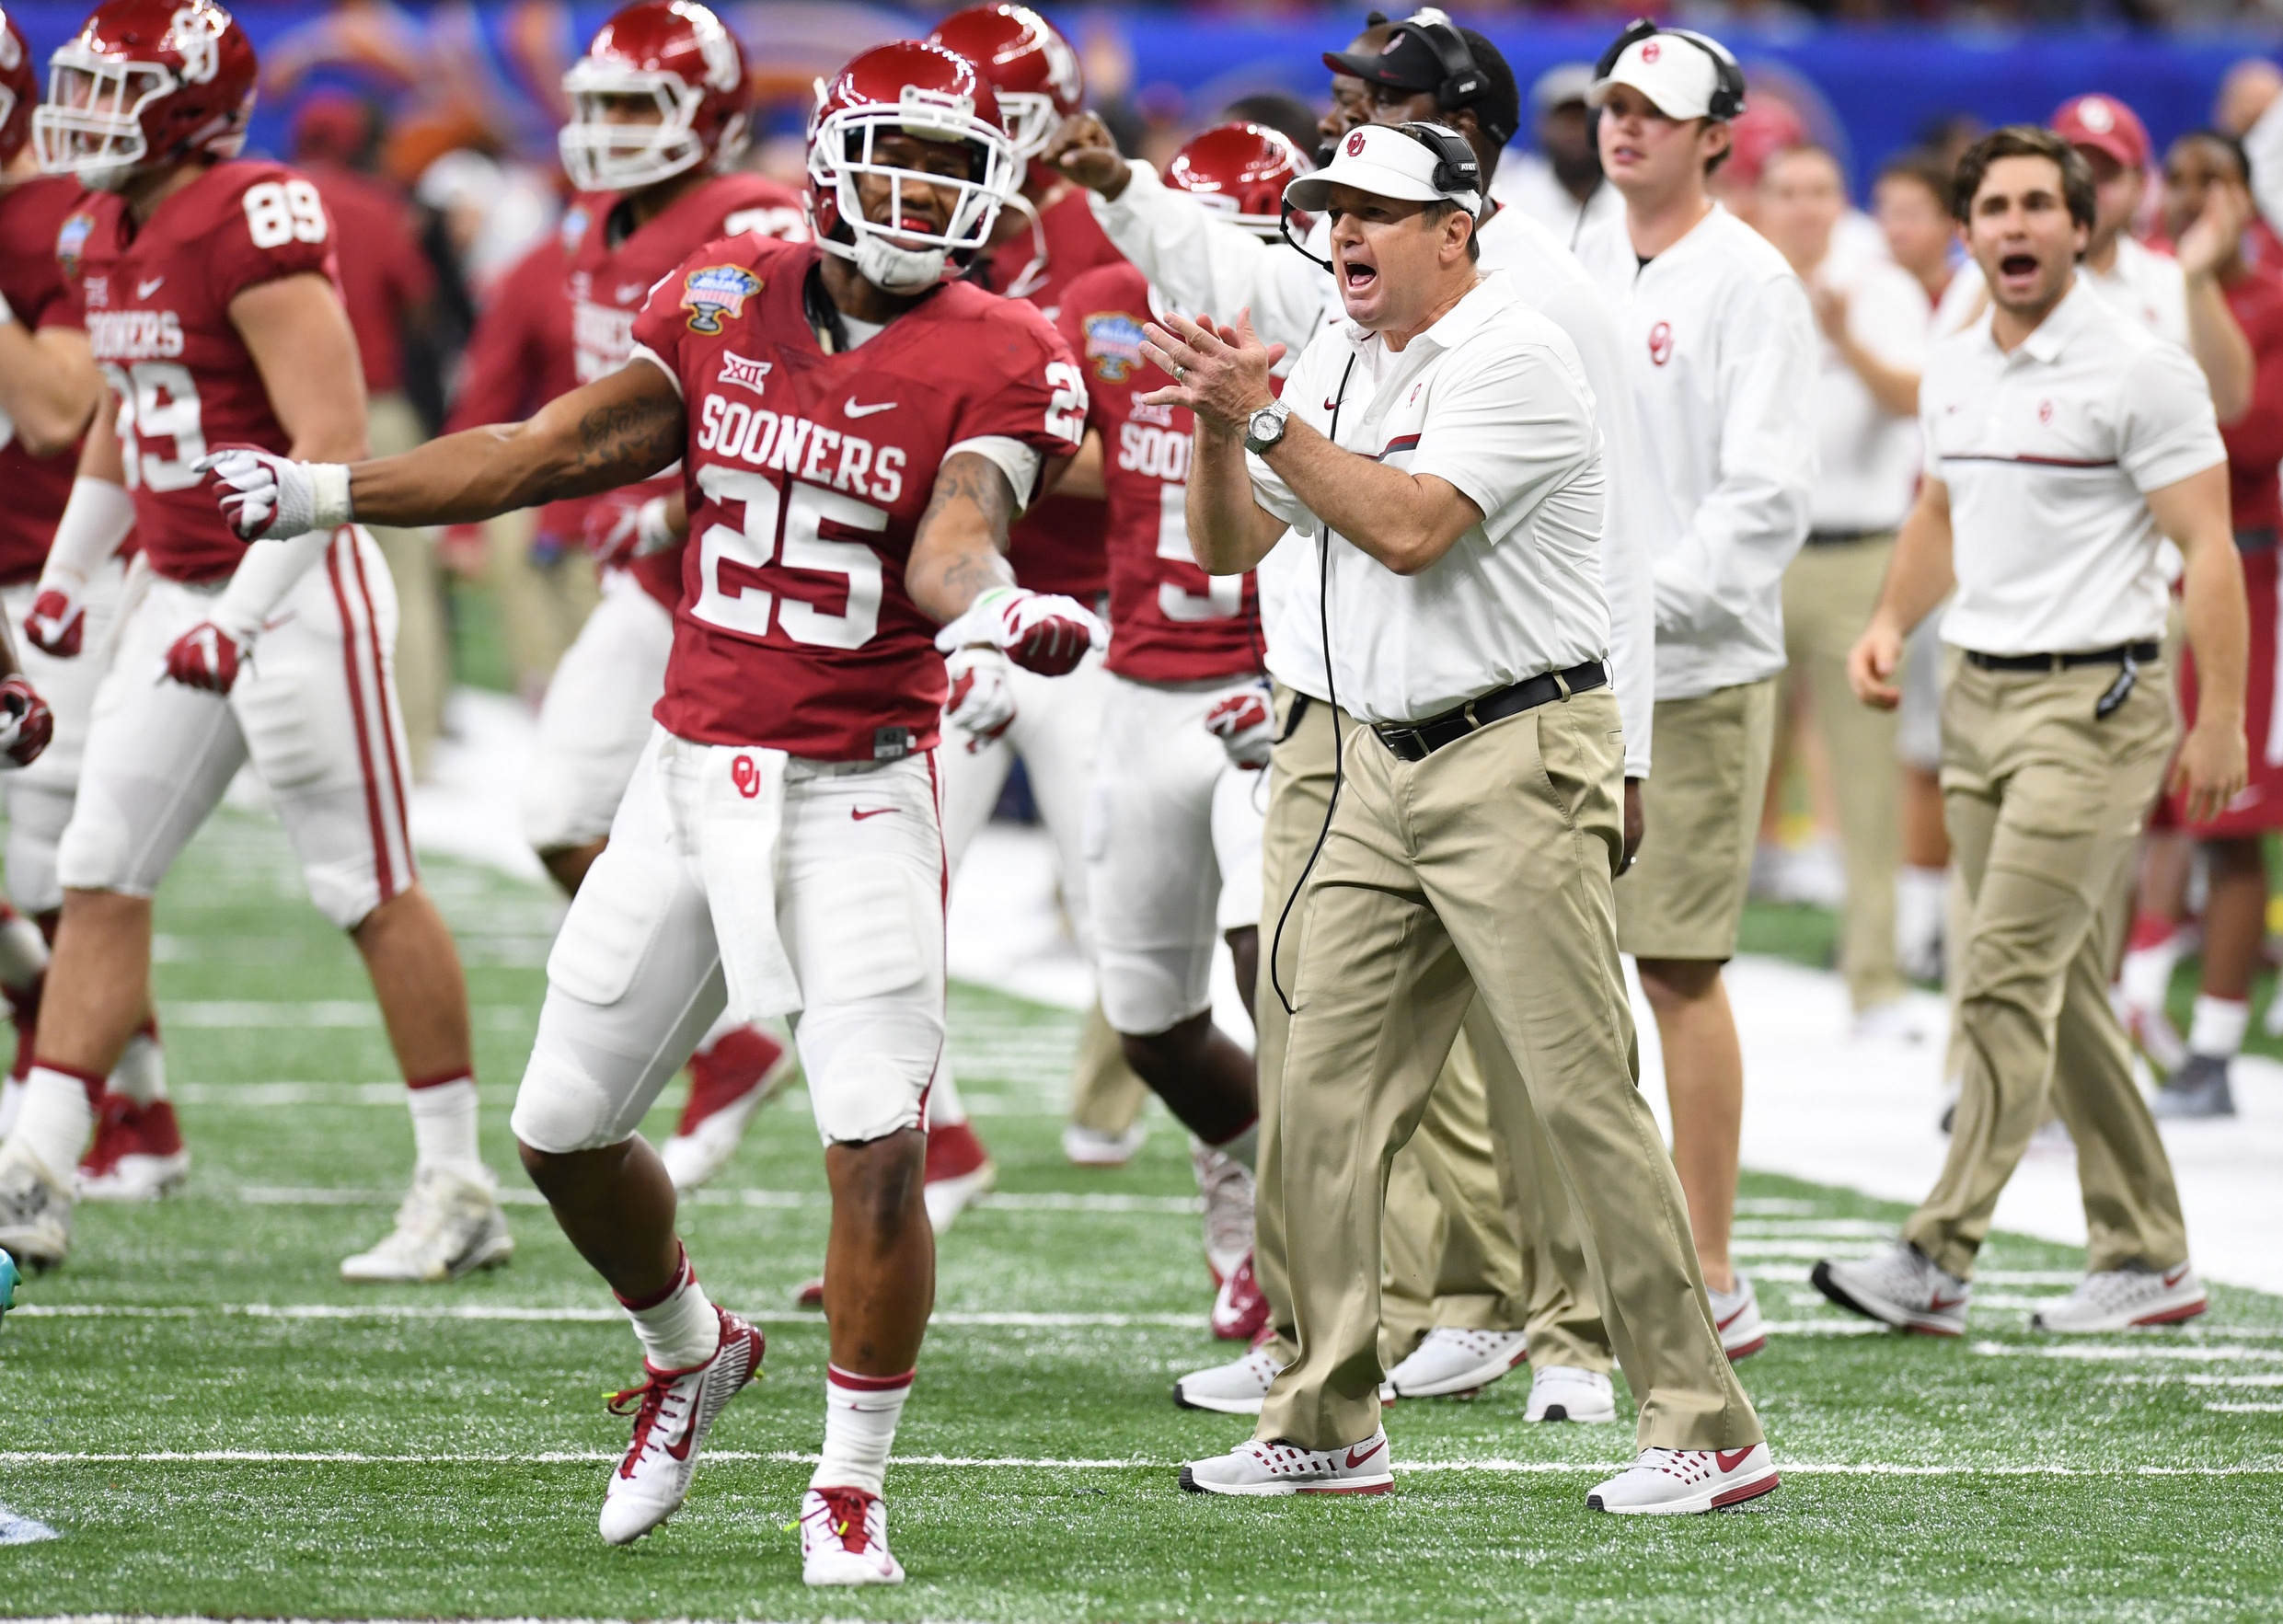 Jan 2, 2017; New Orleans , LA, USA; Oklahoma Sooners running back Joe Mixon (25) and Sooners head coach Bob Stoops react after a stop against the Auburn Tigers in the second quarter of the 2017 Sugar Bowl at the Mercedes-Benz Superdome. Mandatory Credit: John David Mercer-USA TODAY Sports